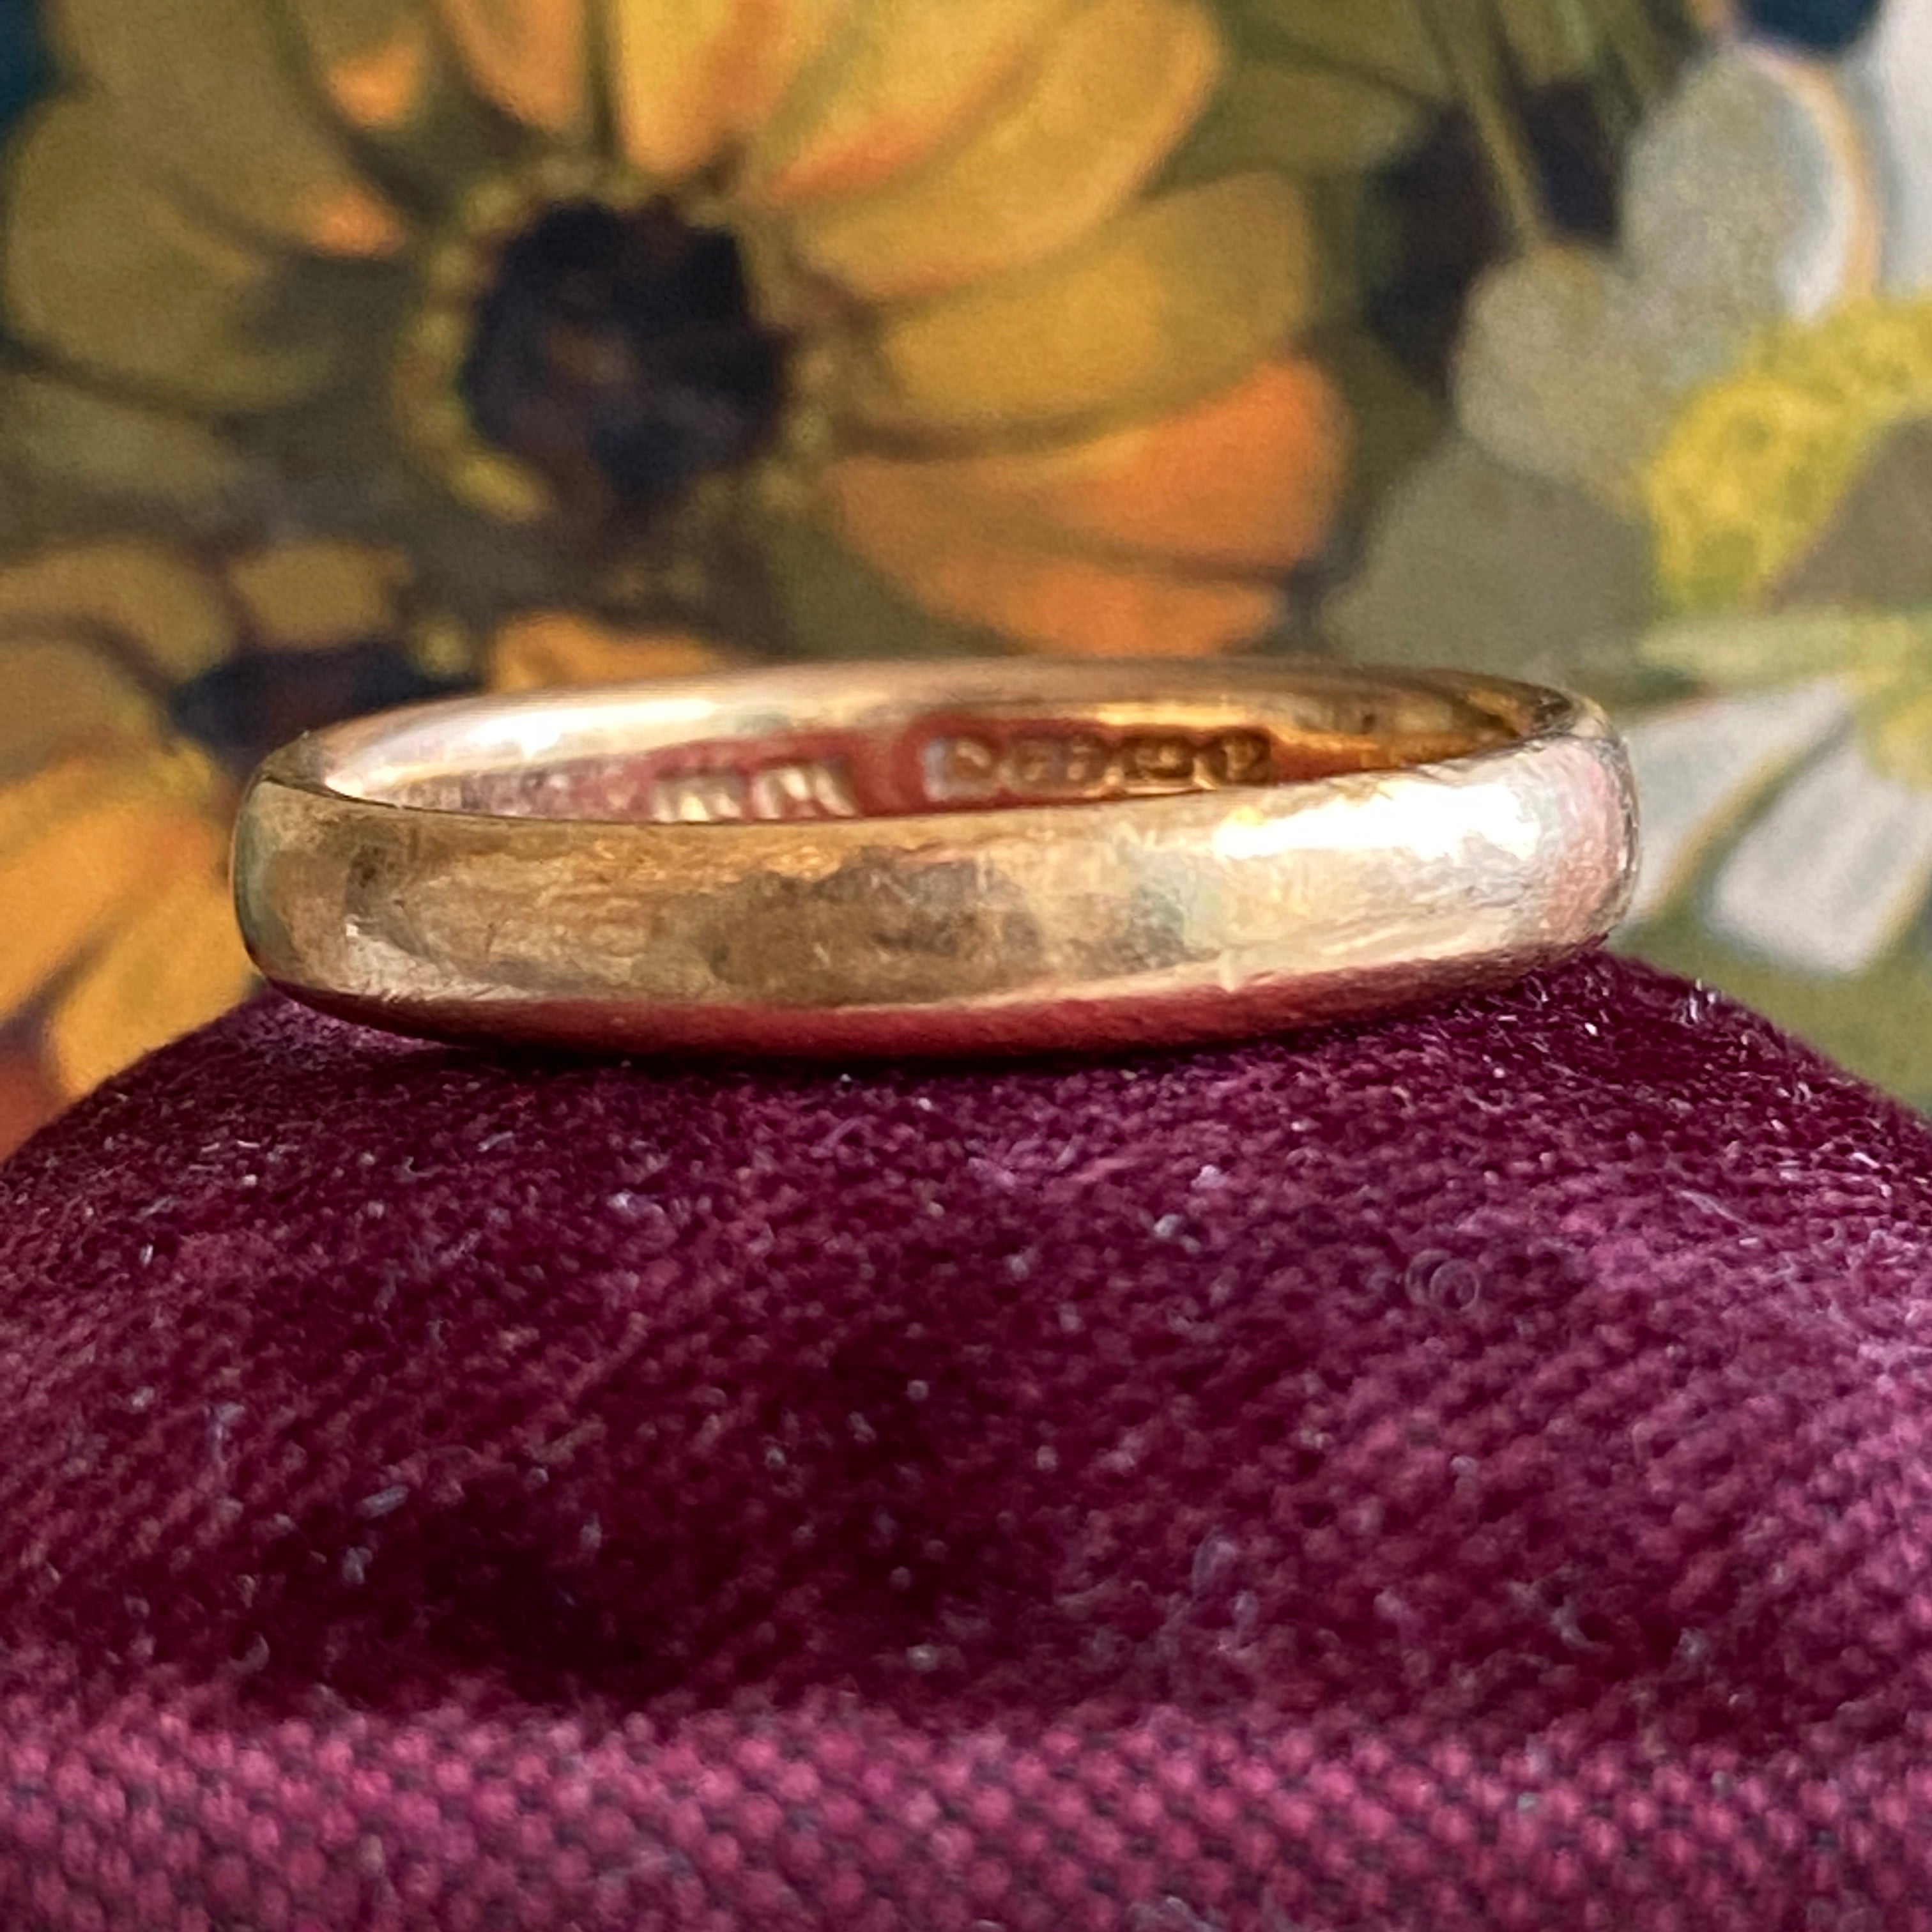 Details:
Art Deco chunky antique wedding band in heavy buttery 22K yellow gold! It is so lovely, and soft. It has a rounded fit, and is very comfortable on your hand. This band would pair nicely with a diamond band or another 22K ring! The ring has